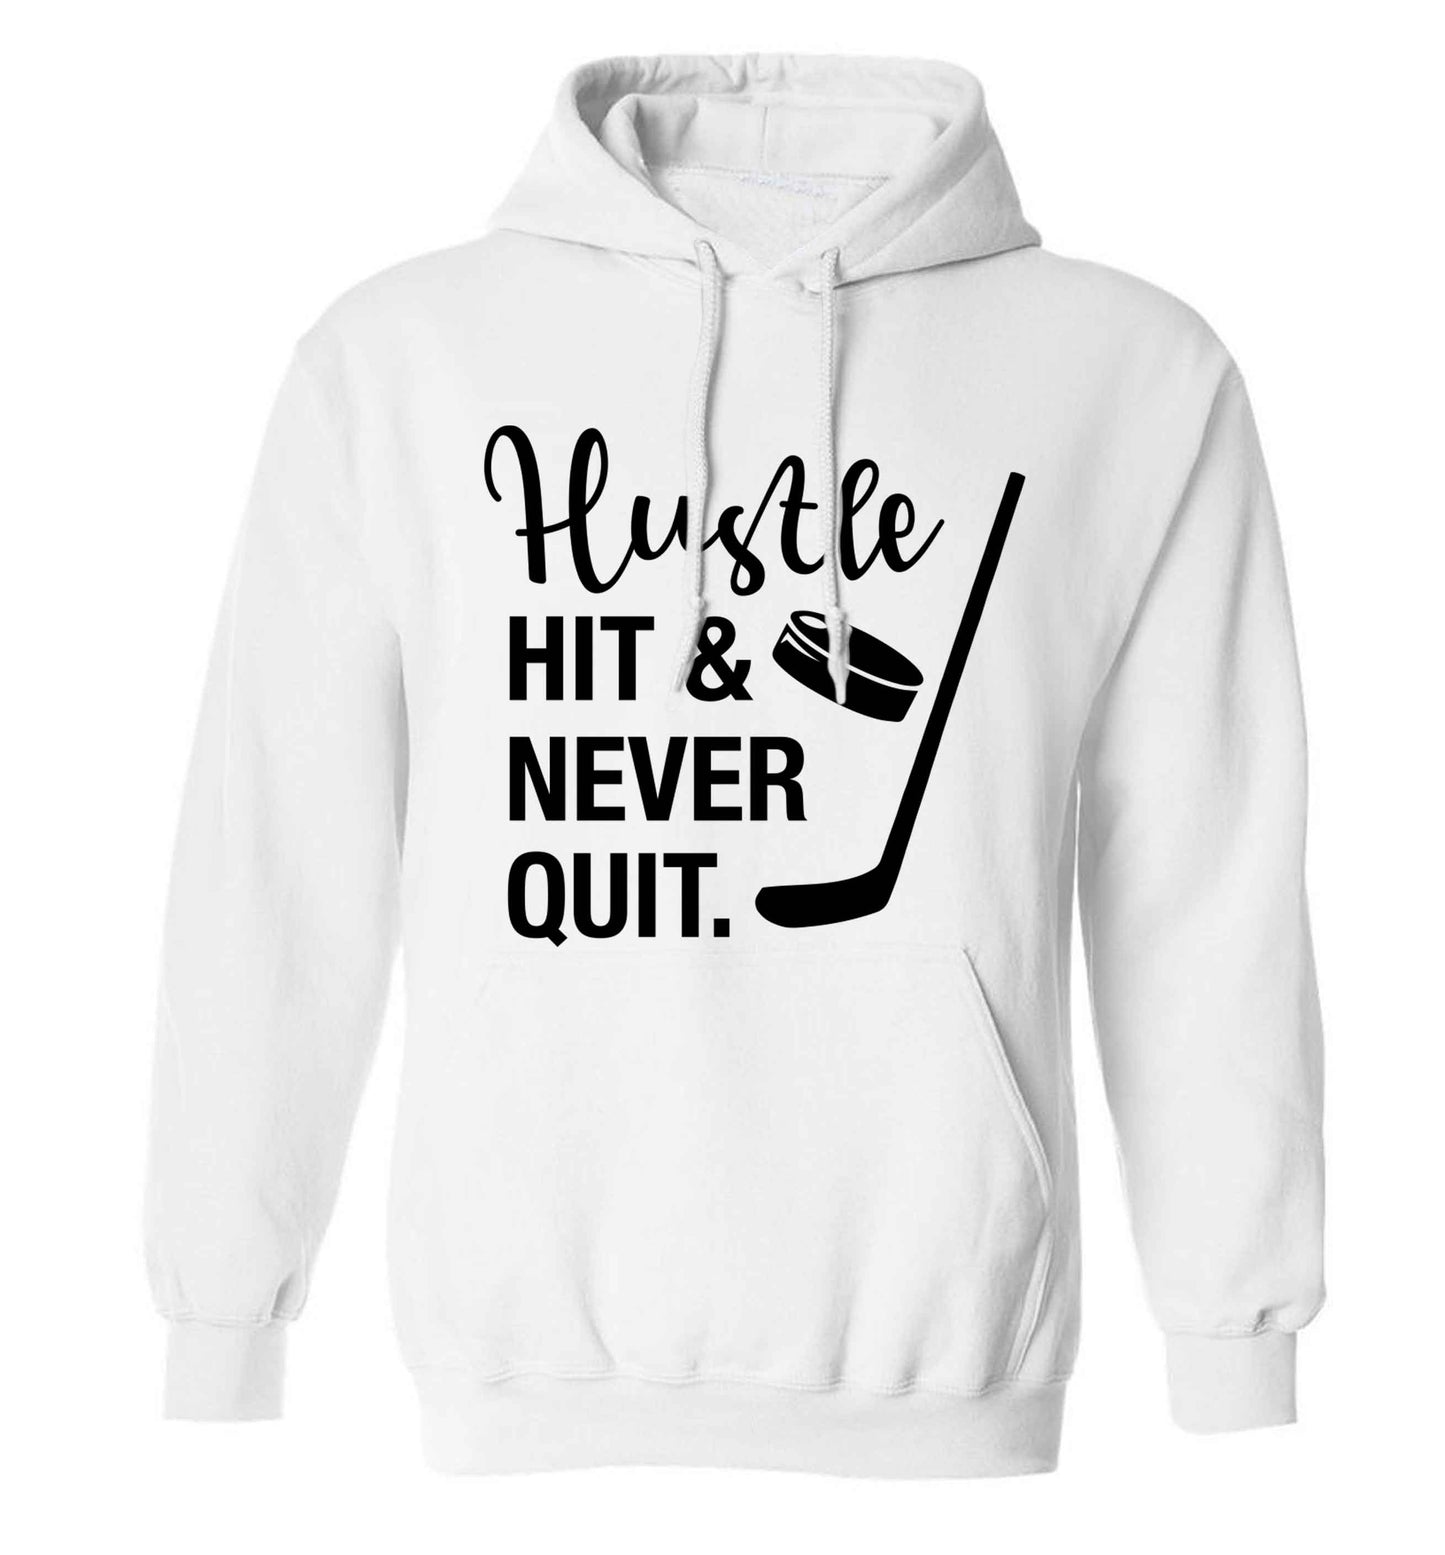 Hustle hit and never quit adults unisex white hoodie 2XL